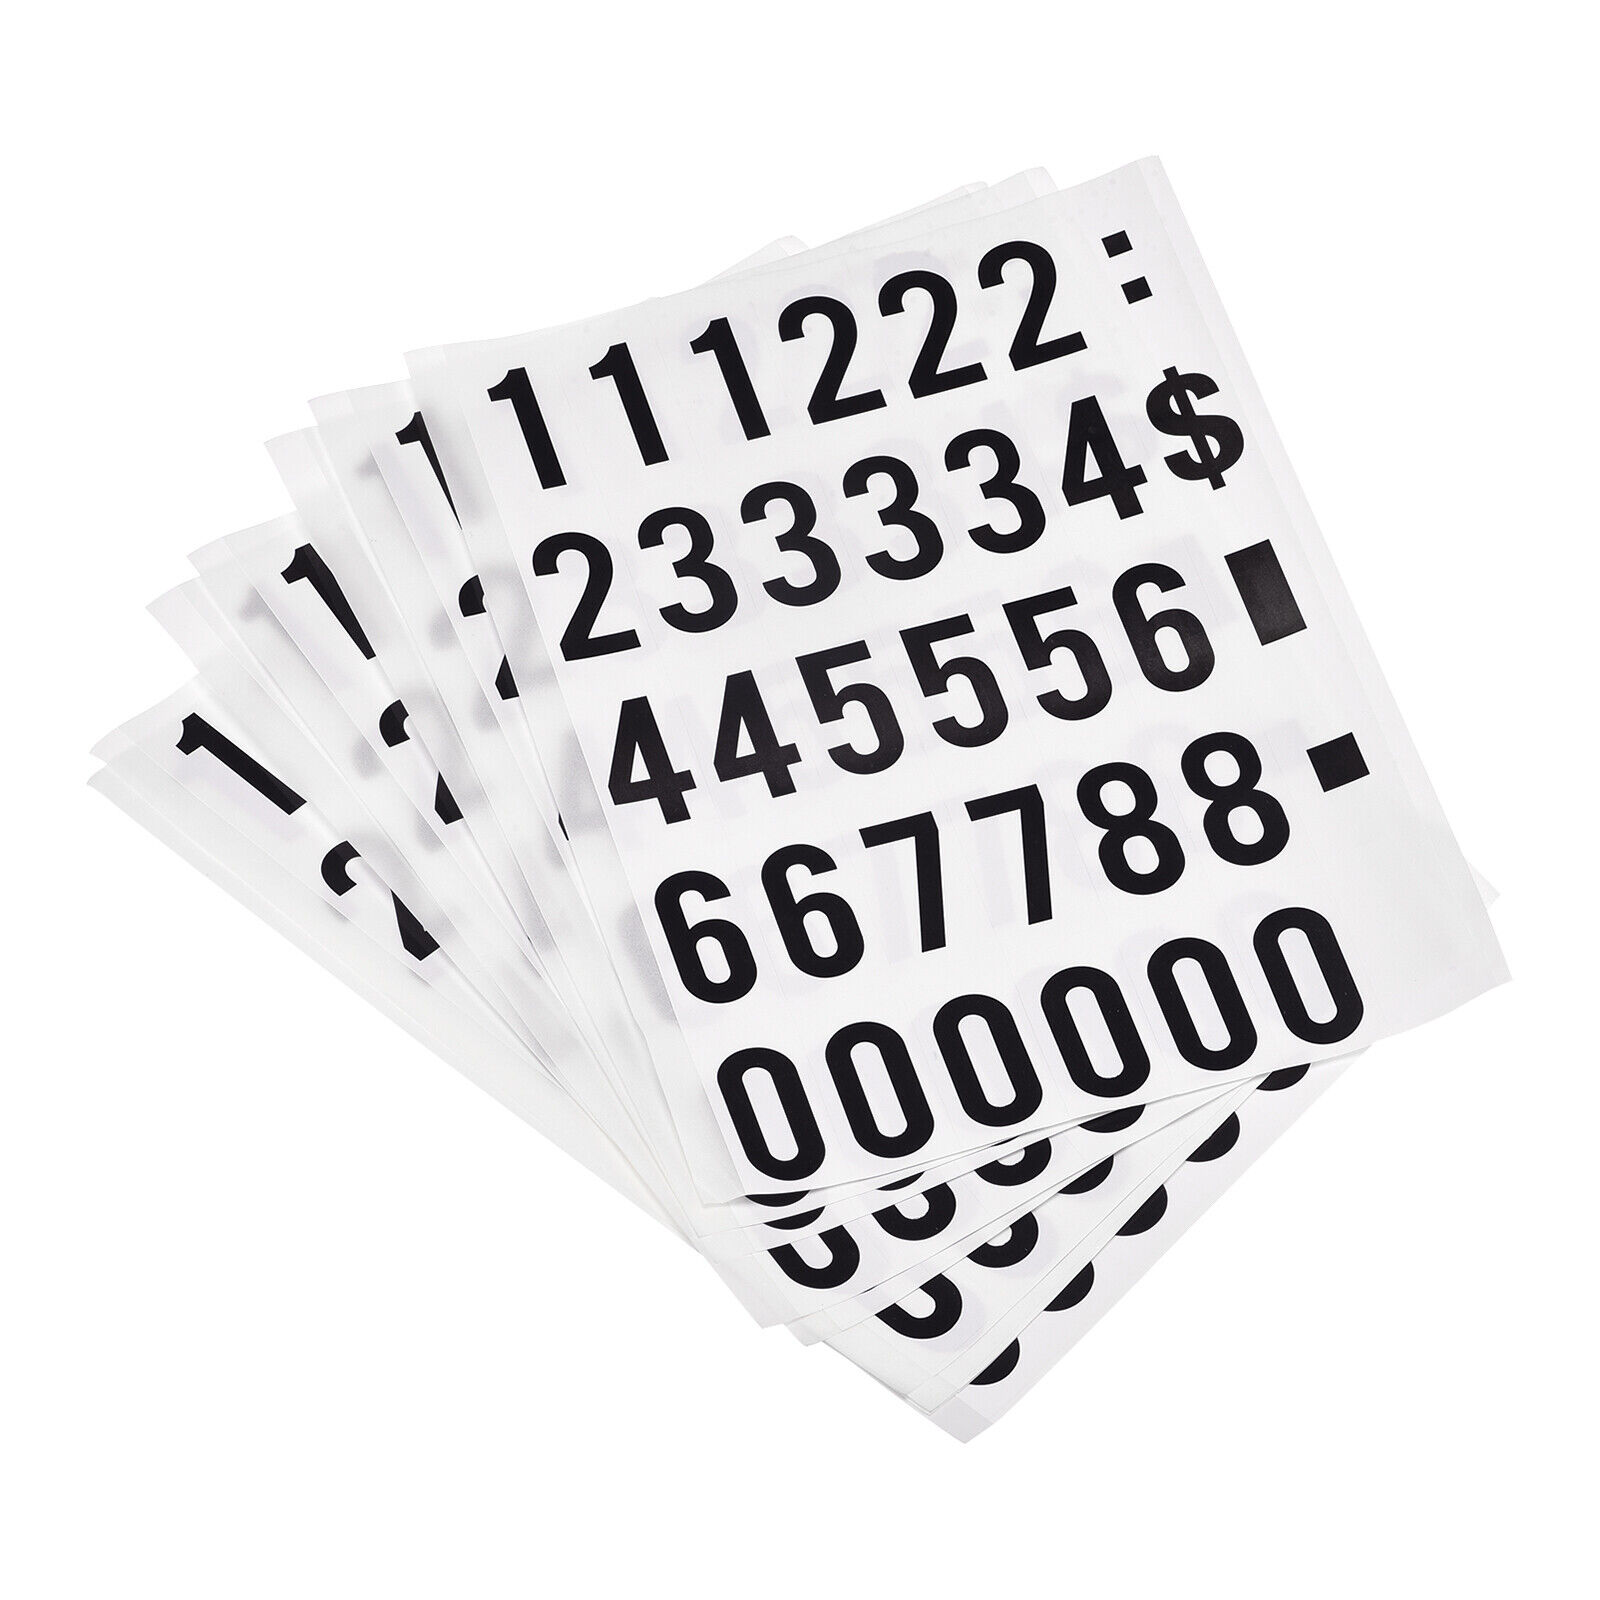 0 To 8 Number Stickers Number Character Label Self Adhesive Marked Sticker,15pcs